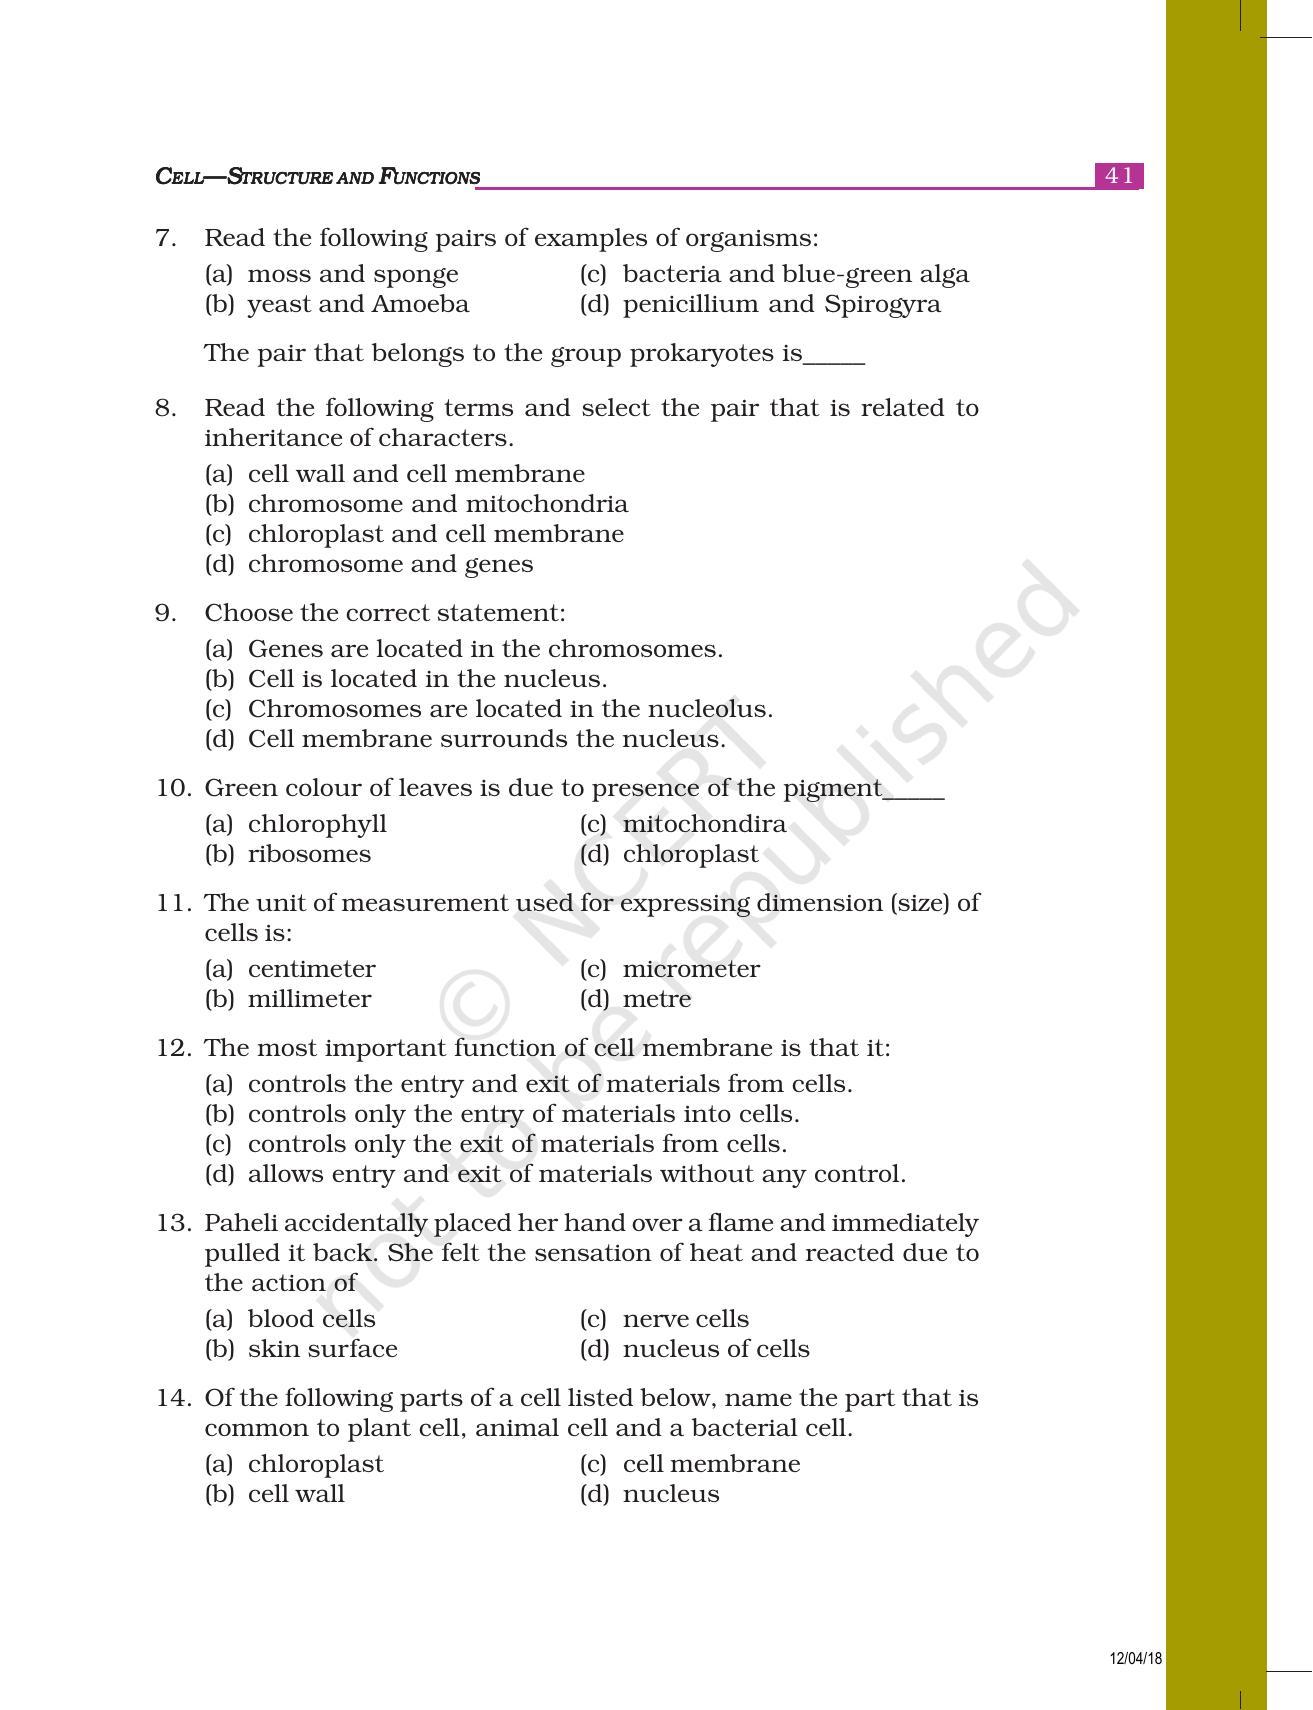 NCERT Exemplar Book for Class 8 Science: Chapter 8- Cell—Structure and Functions - Page 2